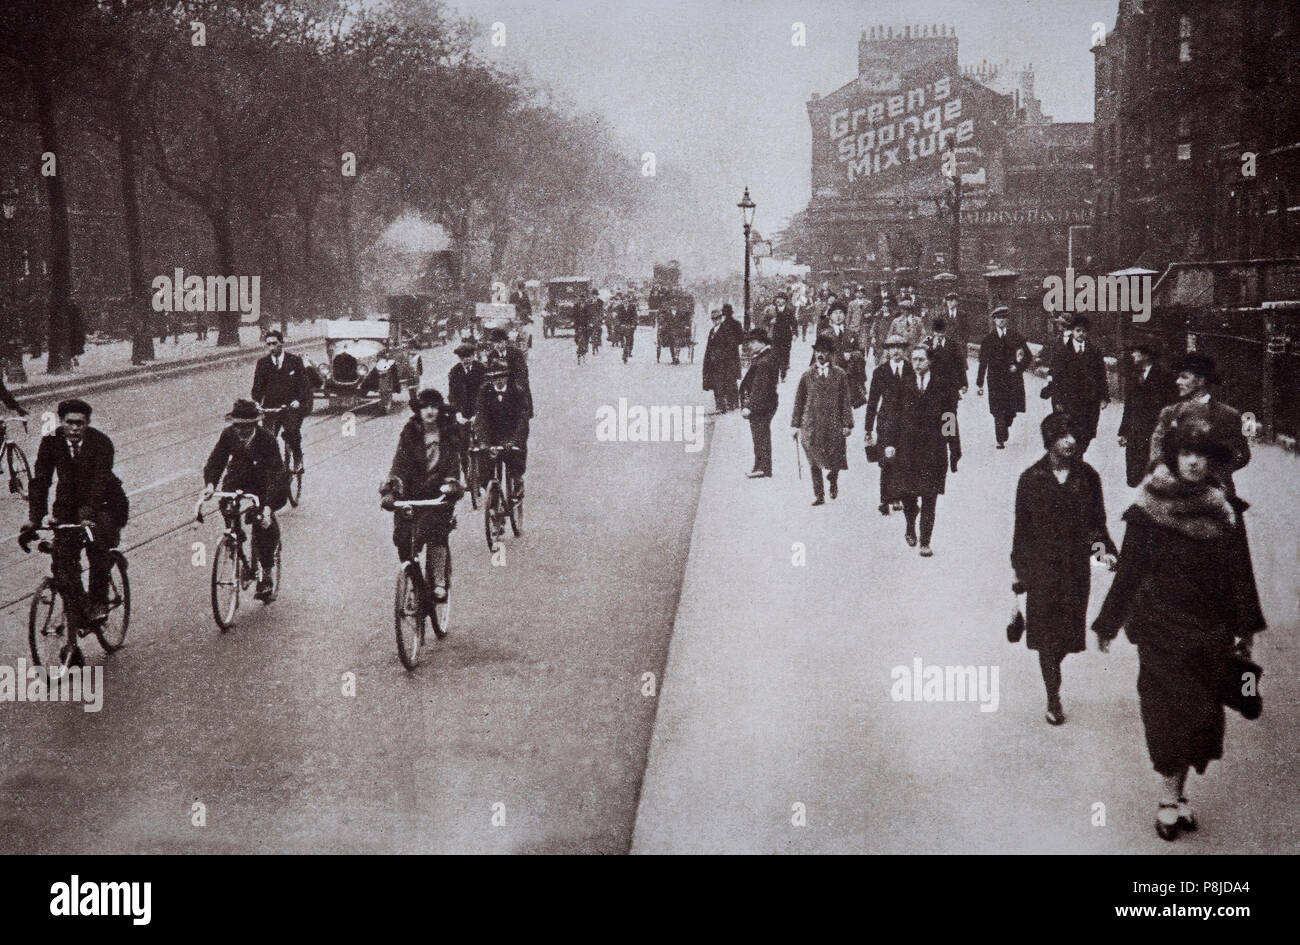 During the General Strike of May 1926 paralysed the English transport system. Few trains, trams, or buses were running from the suberbs in London. Thousands walked or cycled. Stock Photo